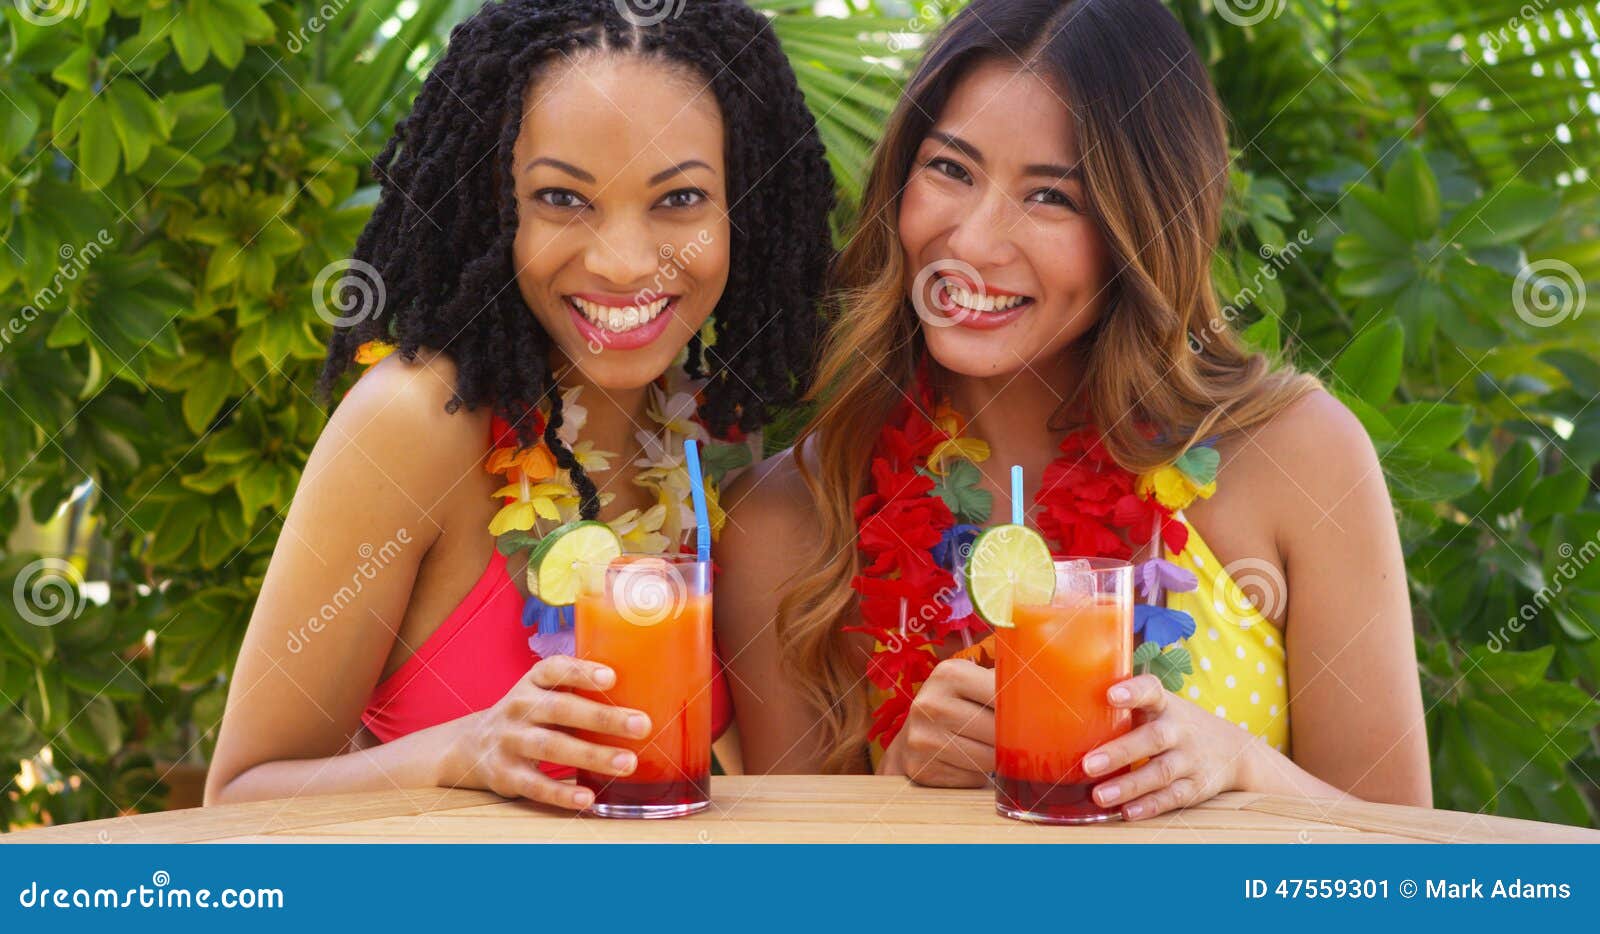 African American and Japanese Best Friends Enjoying Tropical Vacation Together Stock Image pic